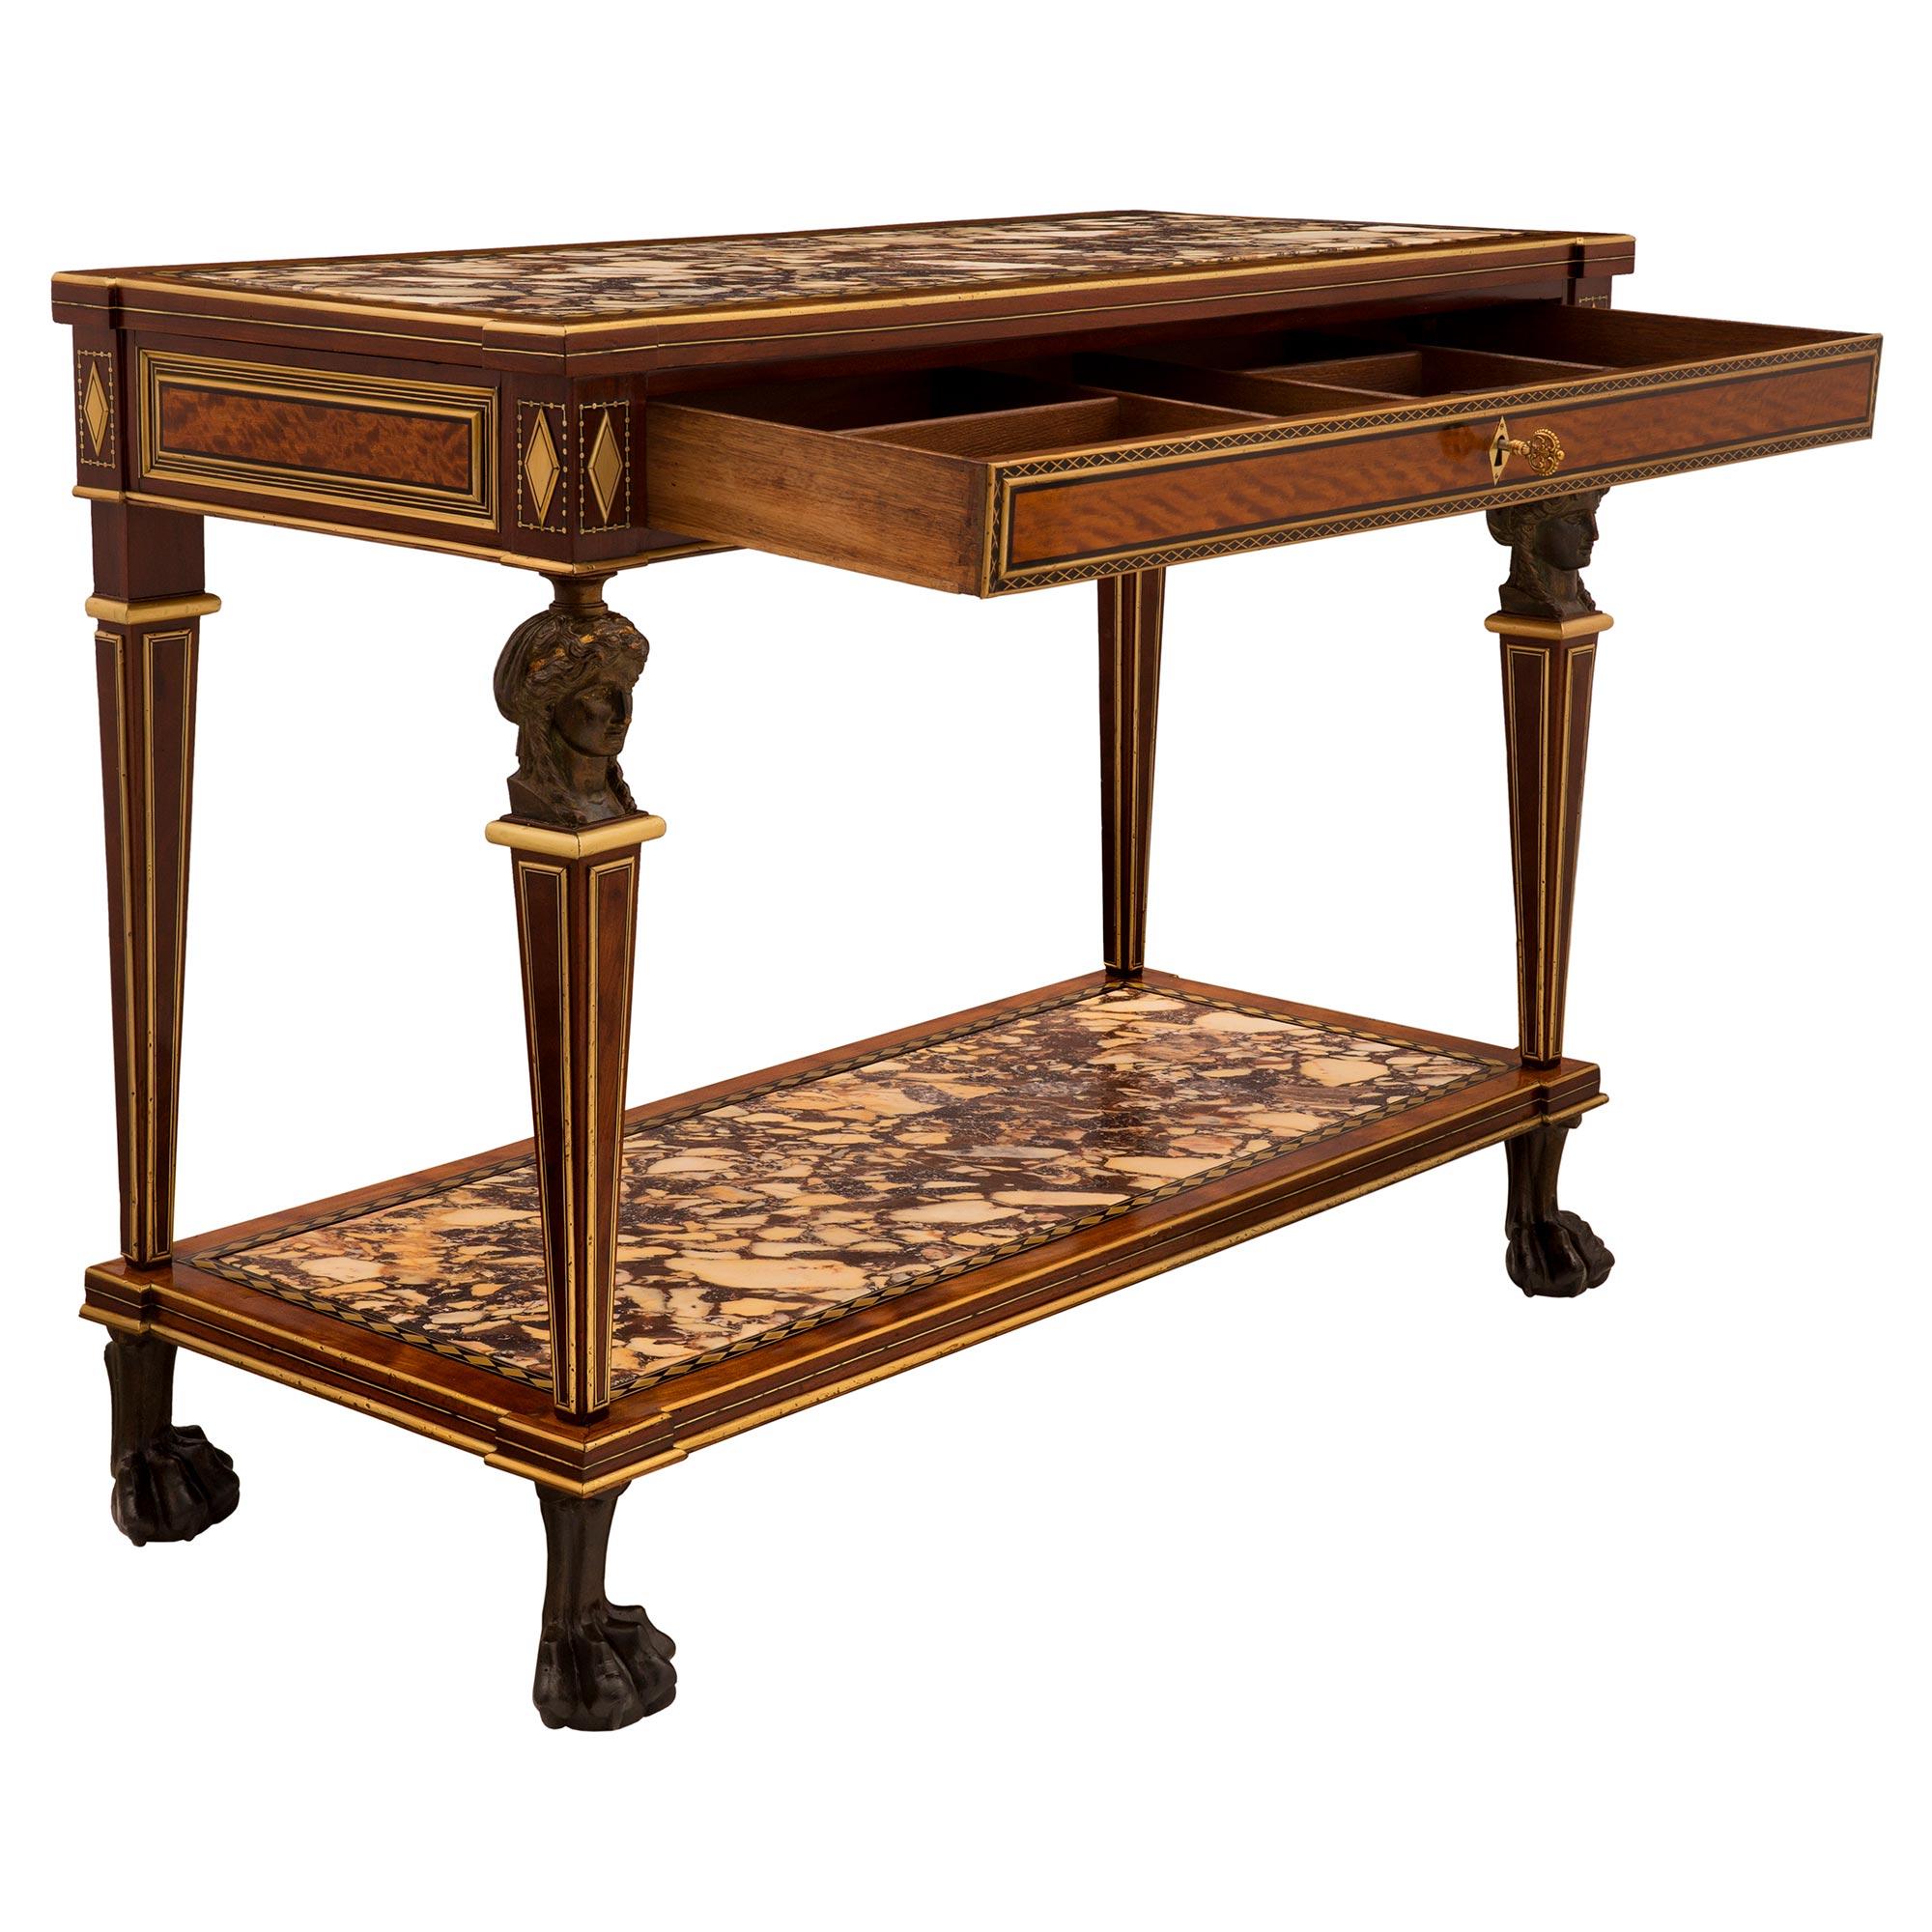 Italian 19th Century Neoclassical Style Freestanding Console In Good Condition For Sale In West Palm Beach, FL